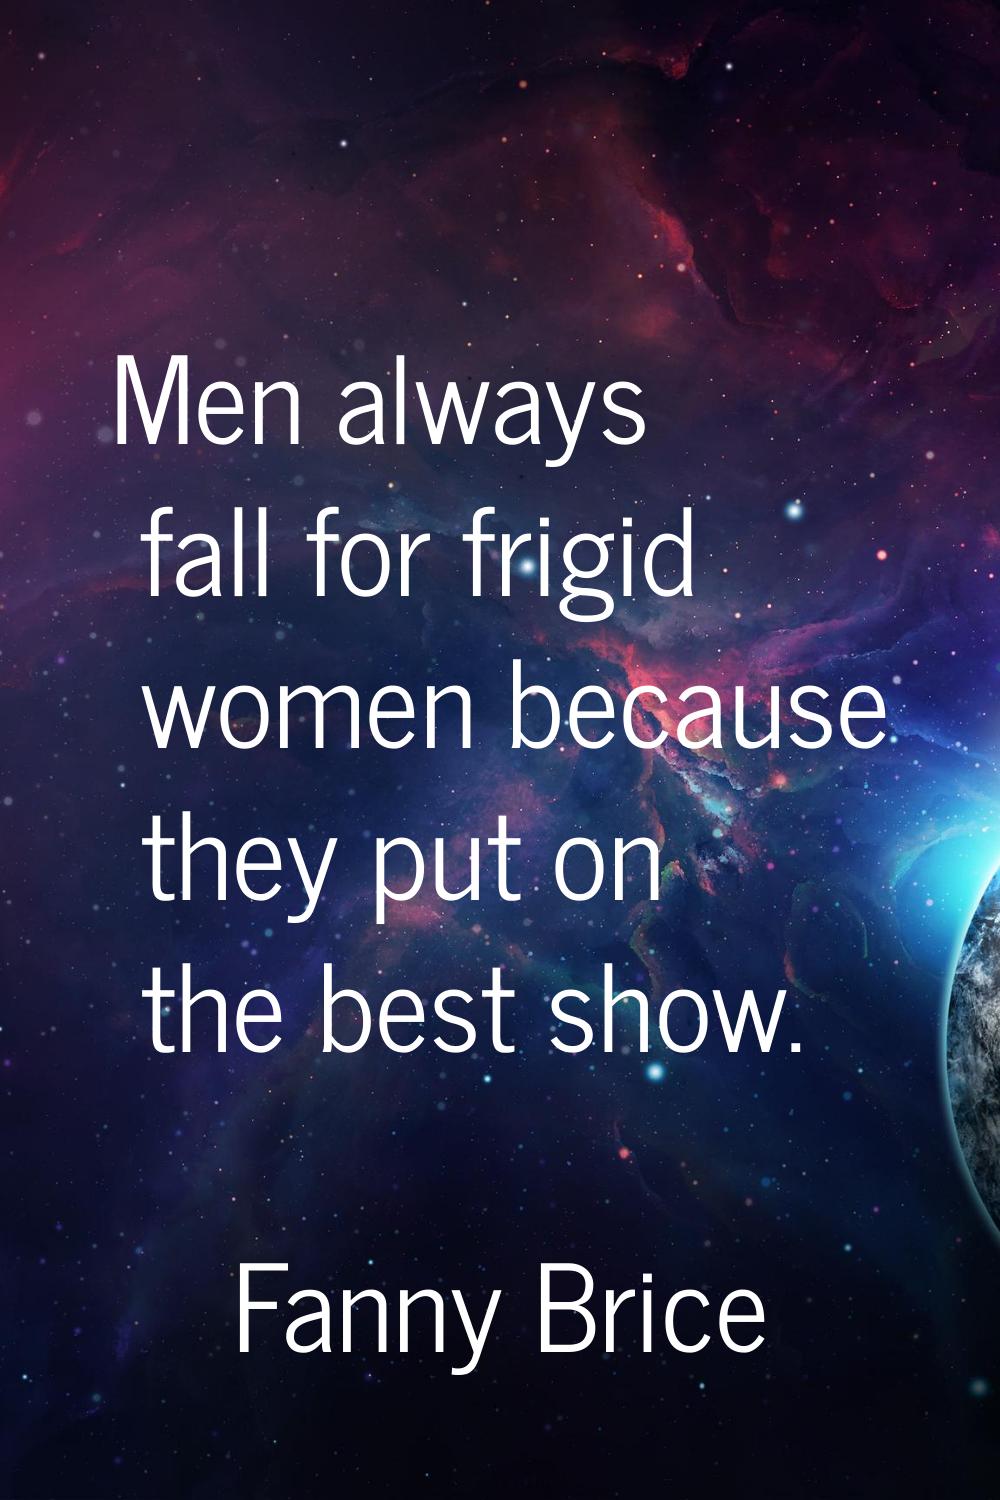 Men always fall for frigid women because they put on the best show.